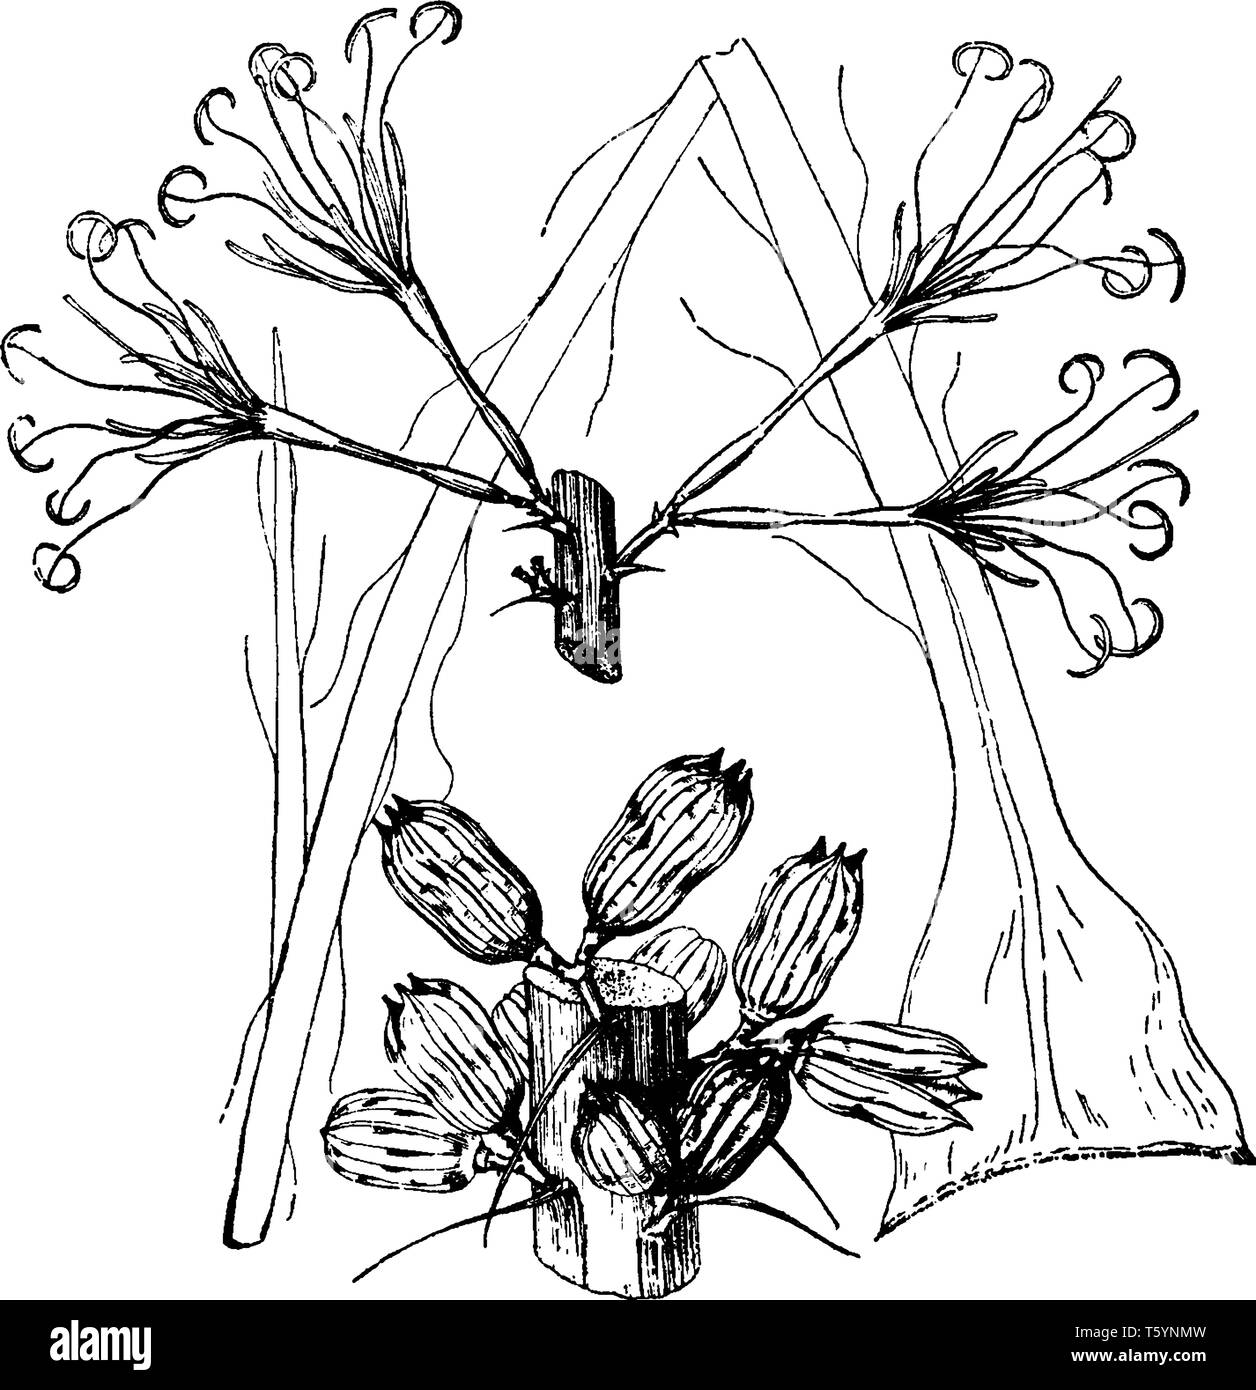 This is a Agave Angustissima with narrow leaves. Its flowers are stalked, vintage line drawing or engraving illustration. Stock Vector